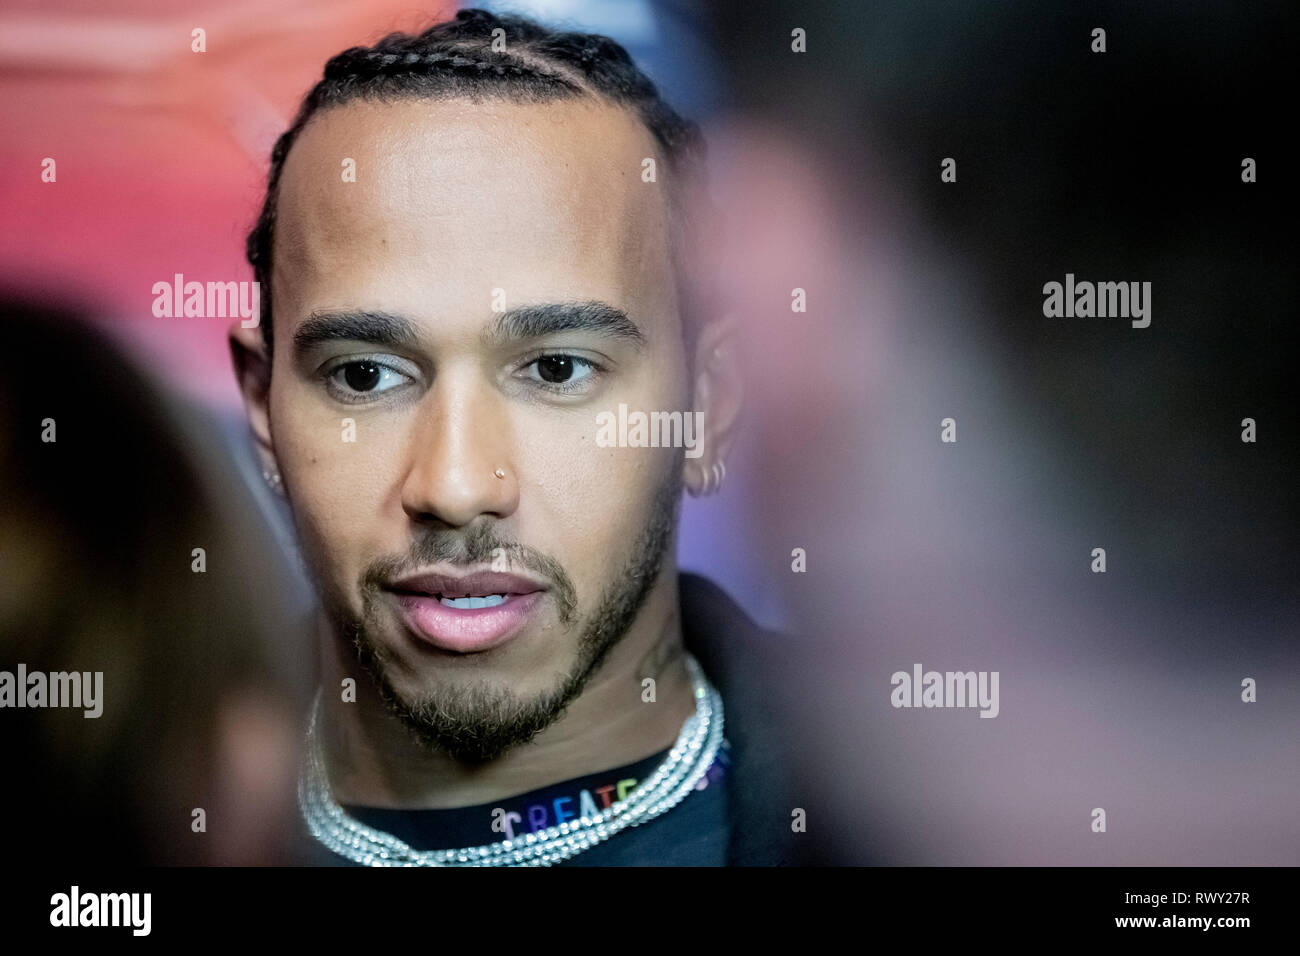 Berlin, Germany. 07th Mar, 2019. Lewis Hamilton, racing driver, gives an  interview at the Tommy Hilfiger CREATExUNITY event. Credit: Christoph  Soeder/dpa/Alamy Live News Stock Photo - Alamy